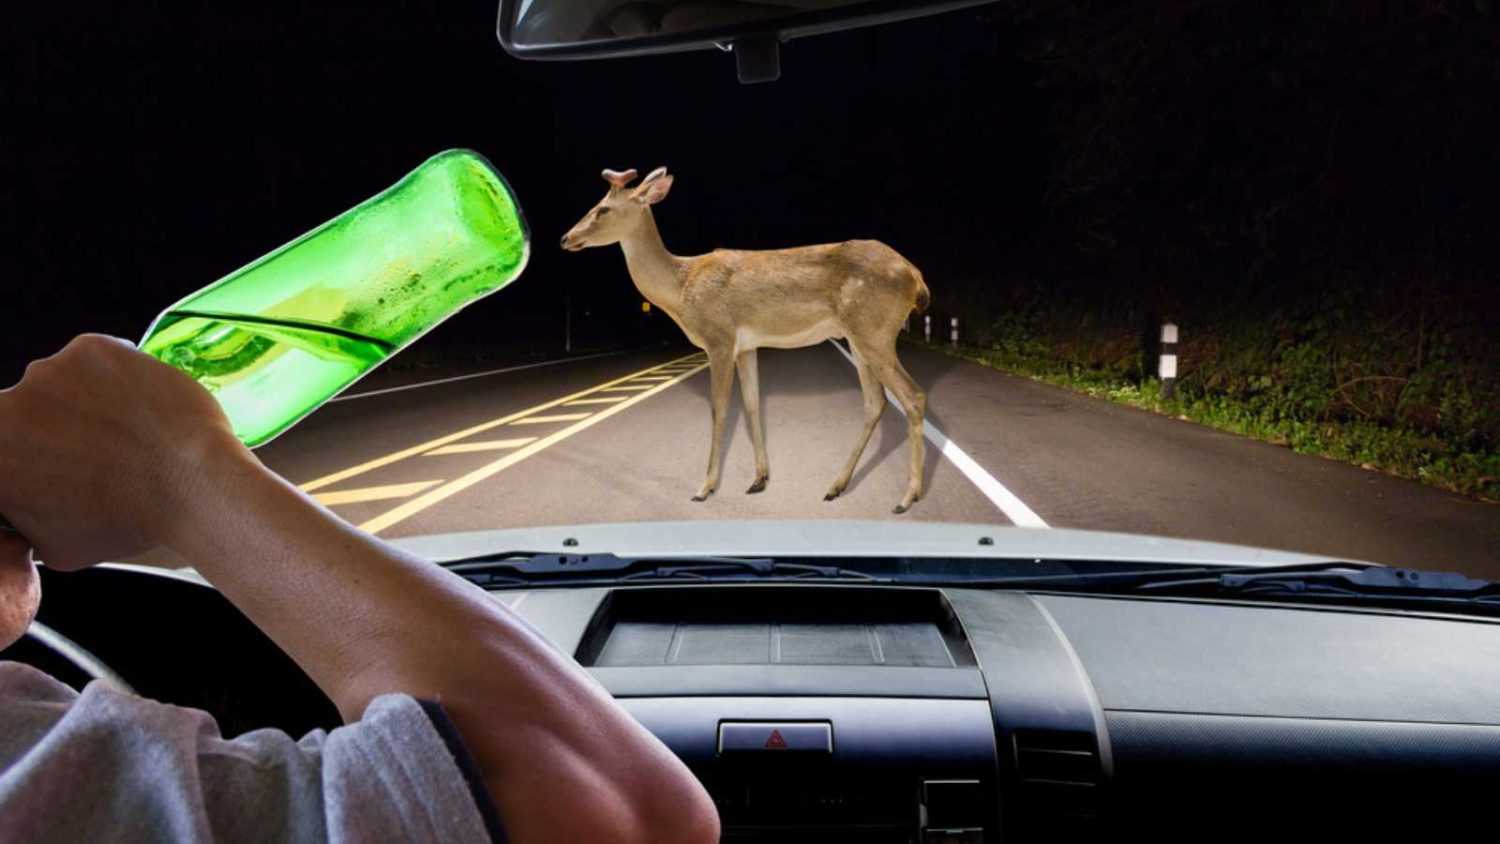 Man drink beer while driving, deer walking on the road at night in the forest as background.
